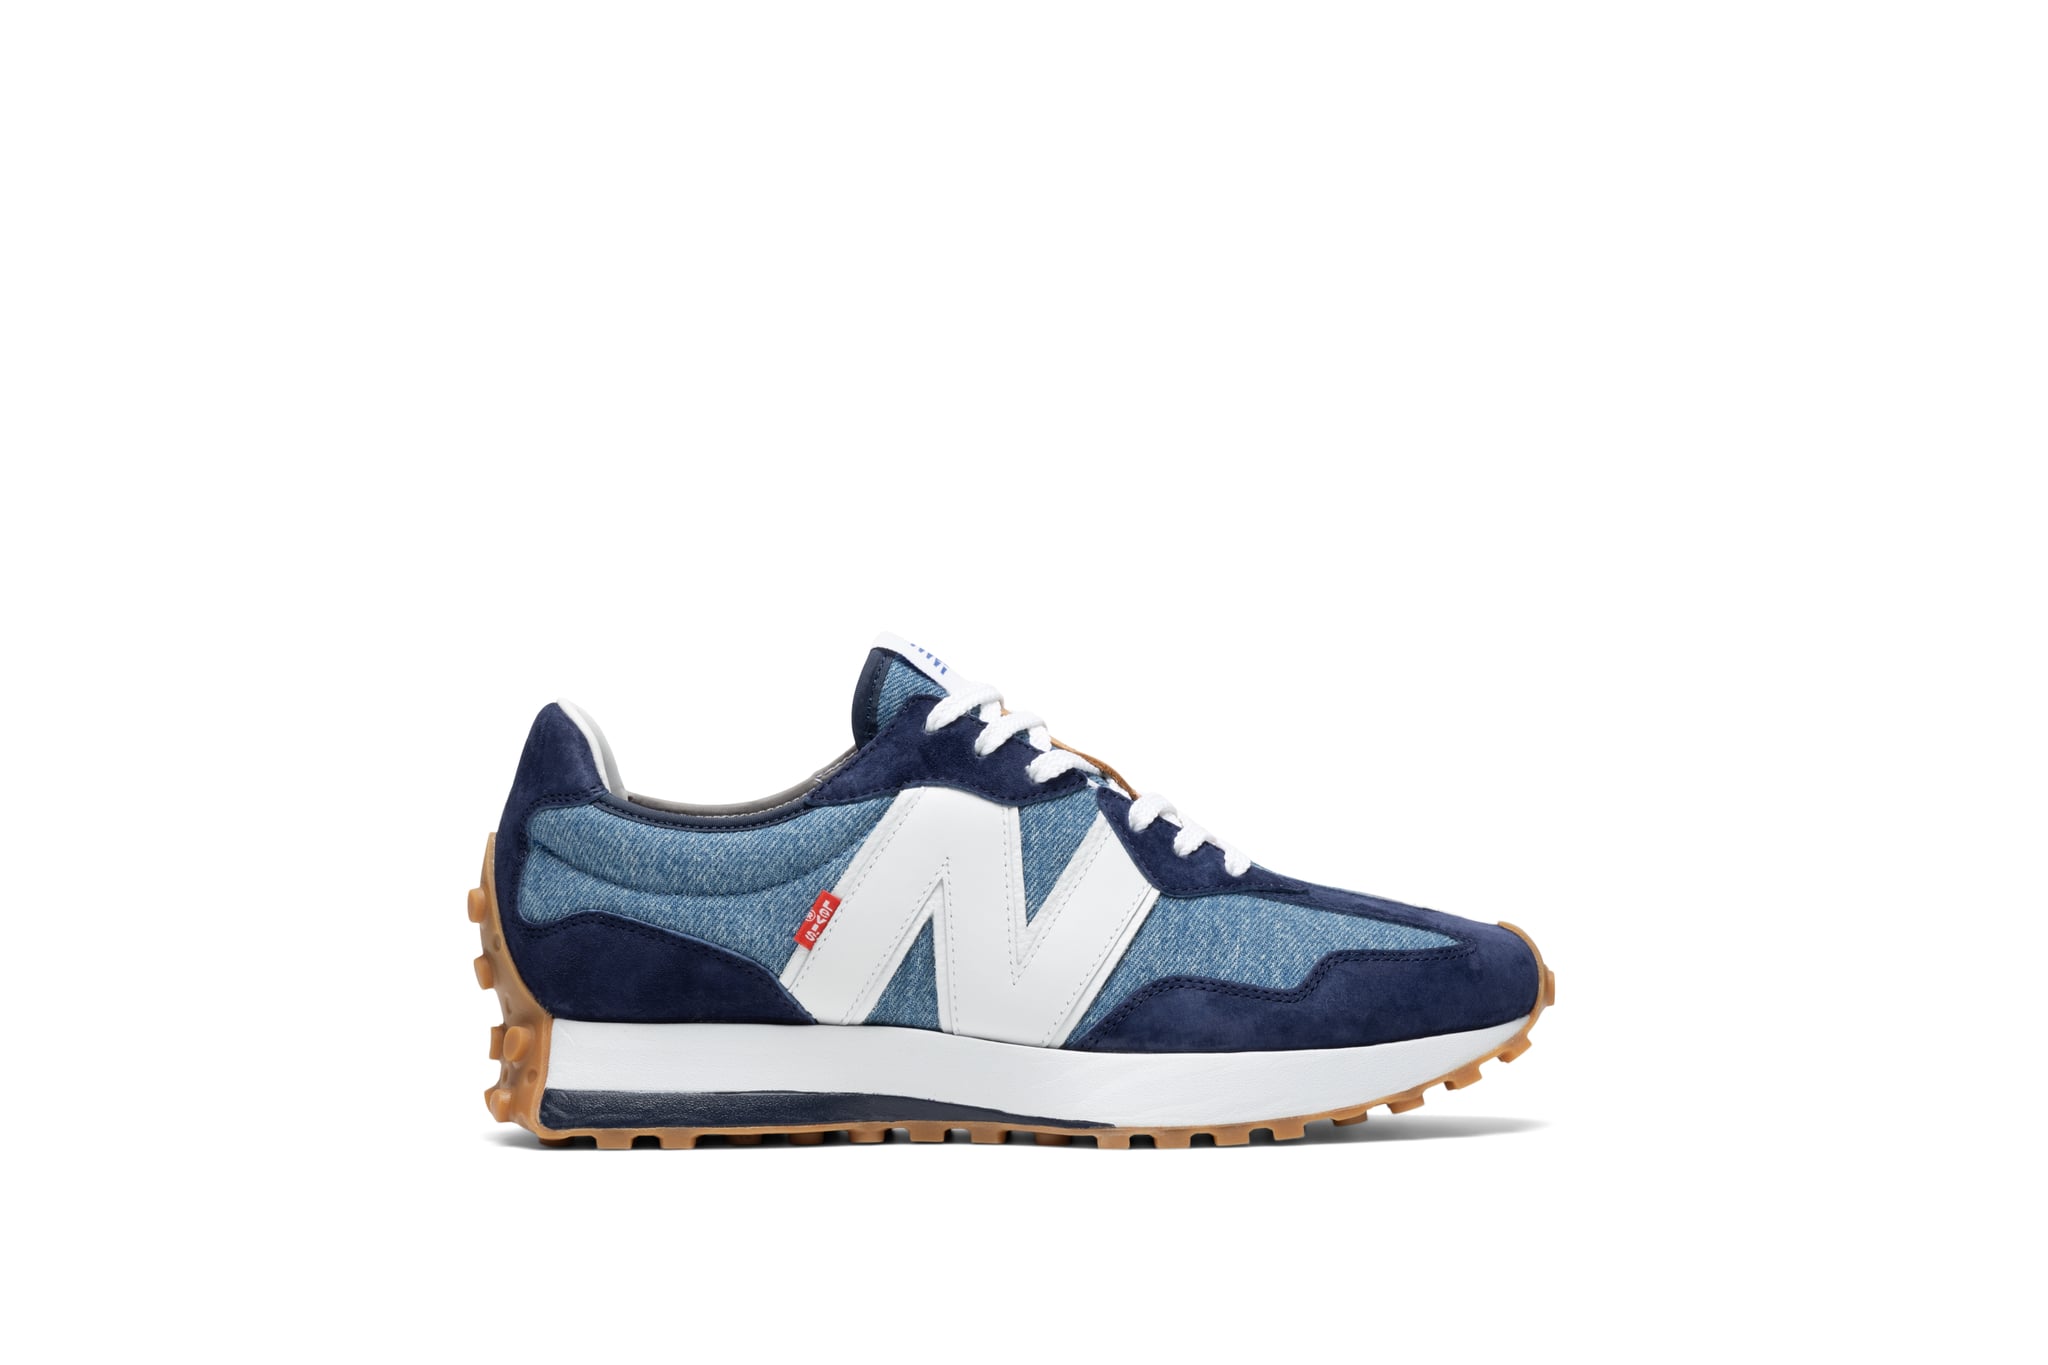 New Balance and Levi's 327 Men's Sneakers | Just For Kicks: New Balance and  Levi's Teamed Up For the Coolest Denim Sneakers | POPSUGAR Fashion Photo 5